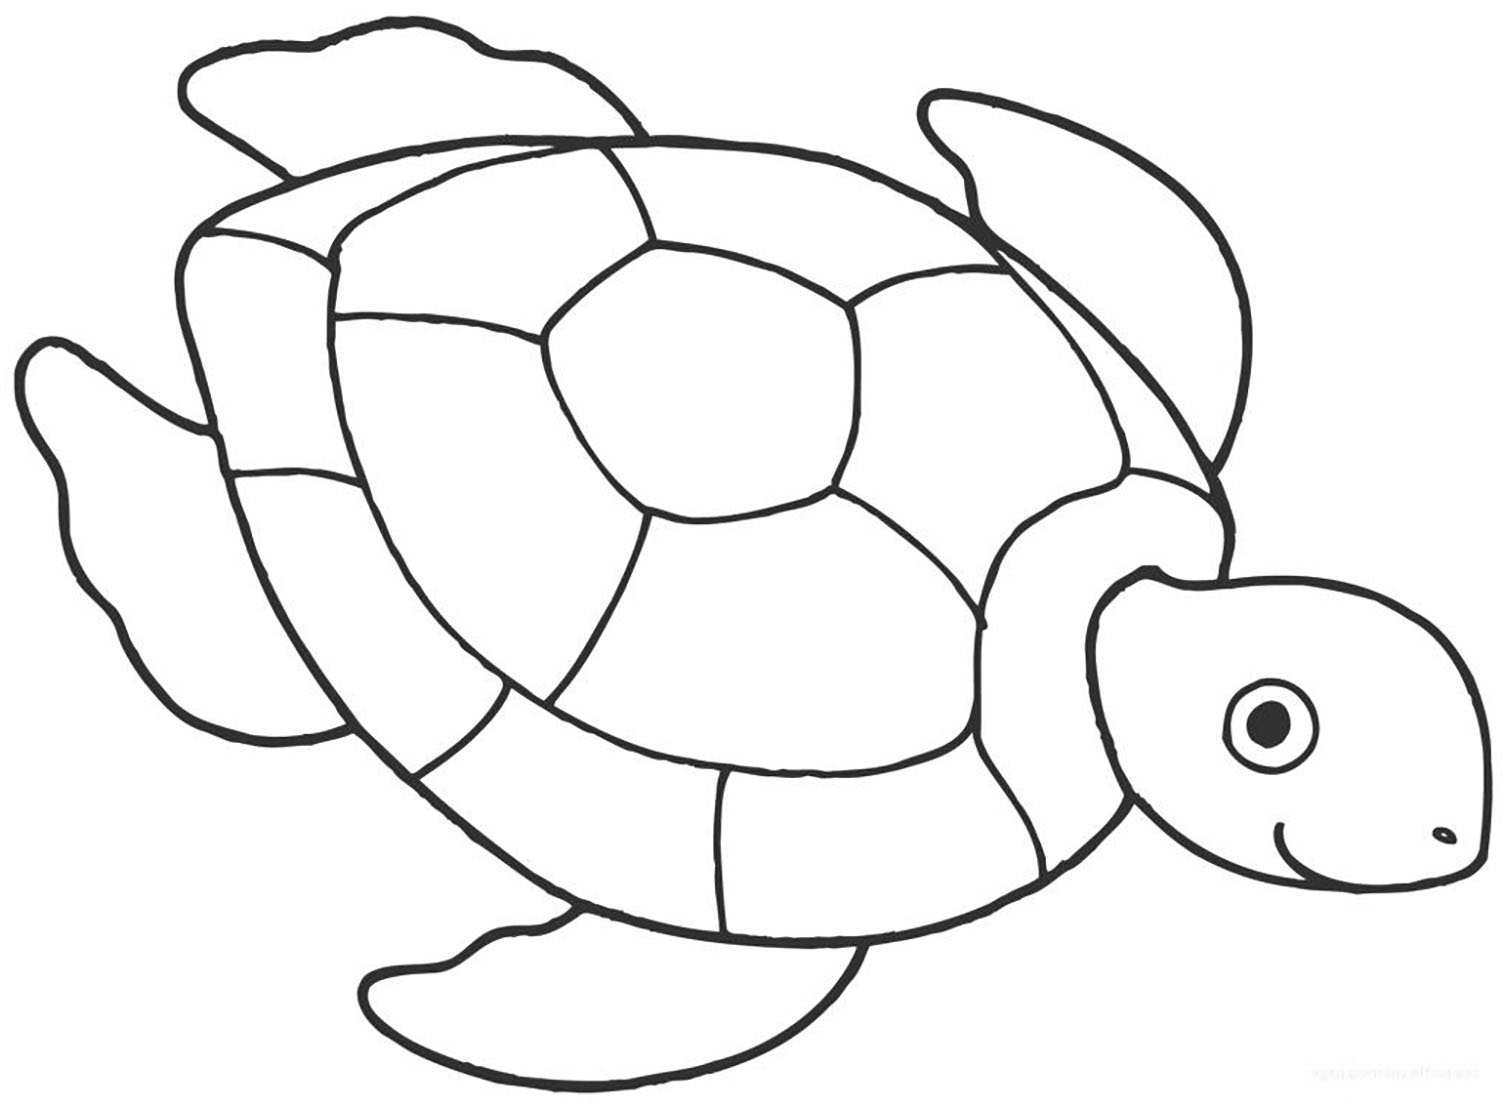 Turtle drawing to color, easy for children